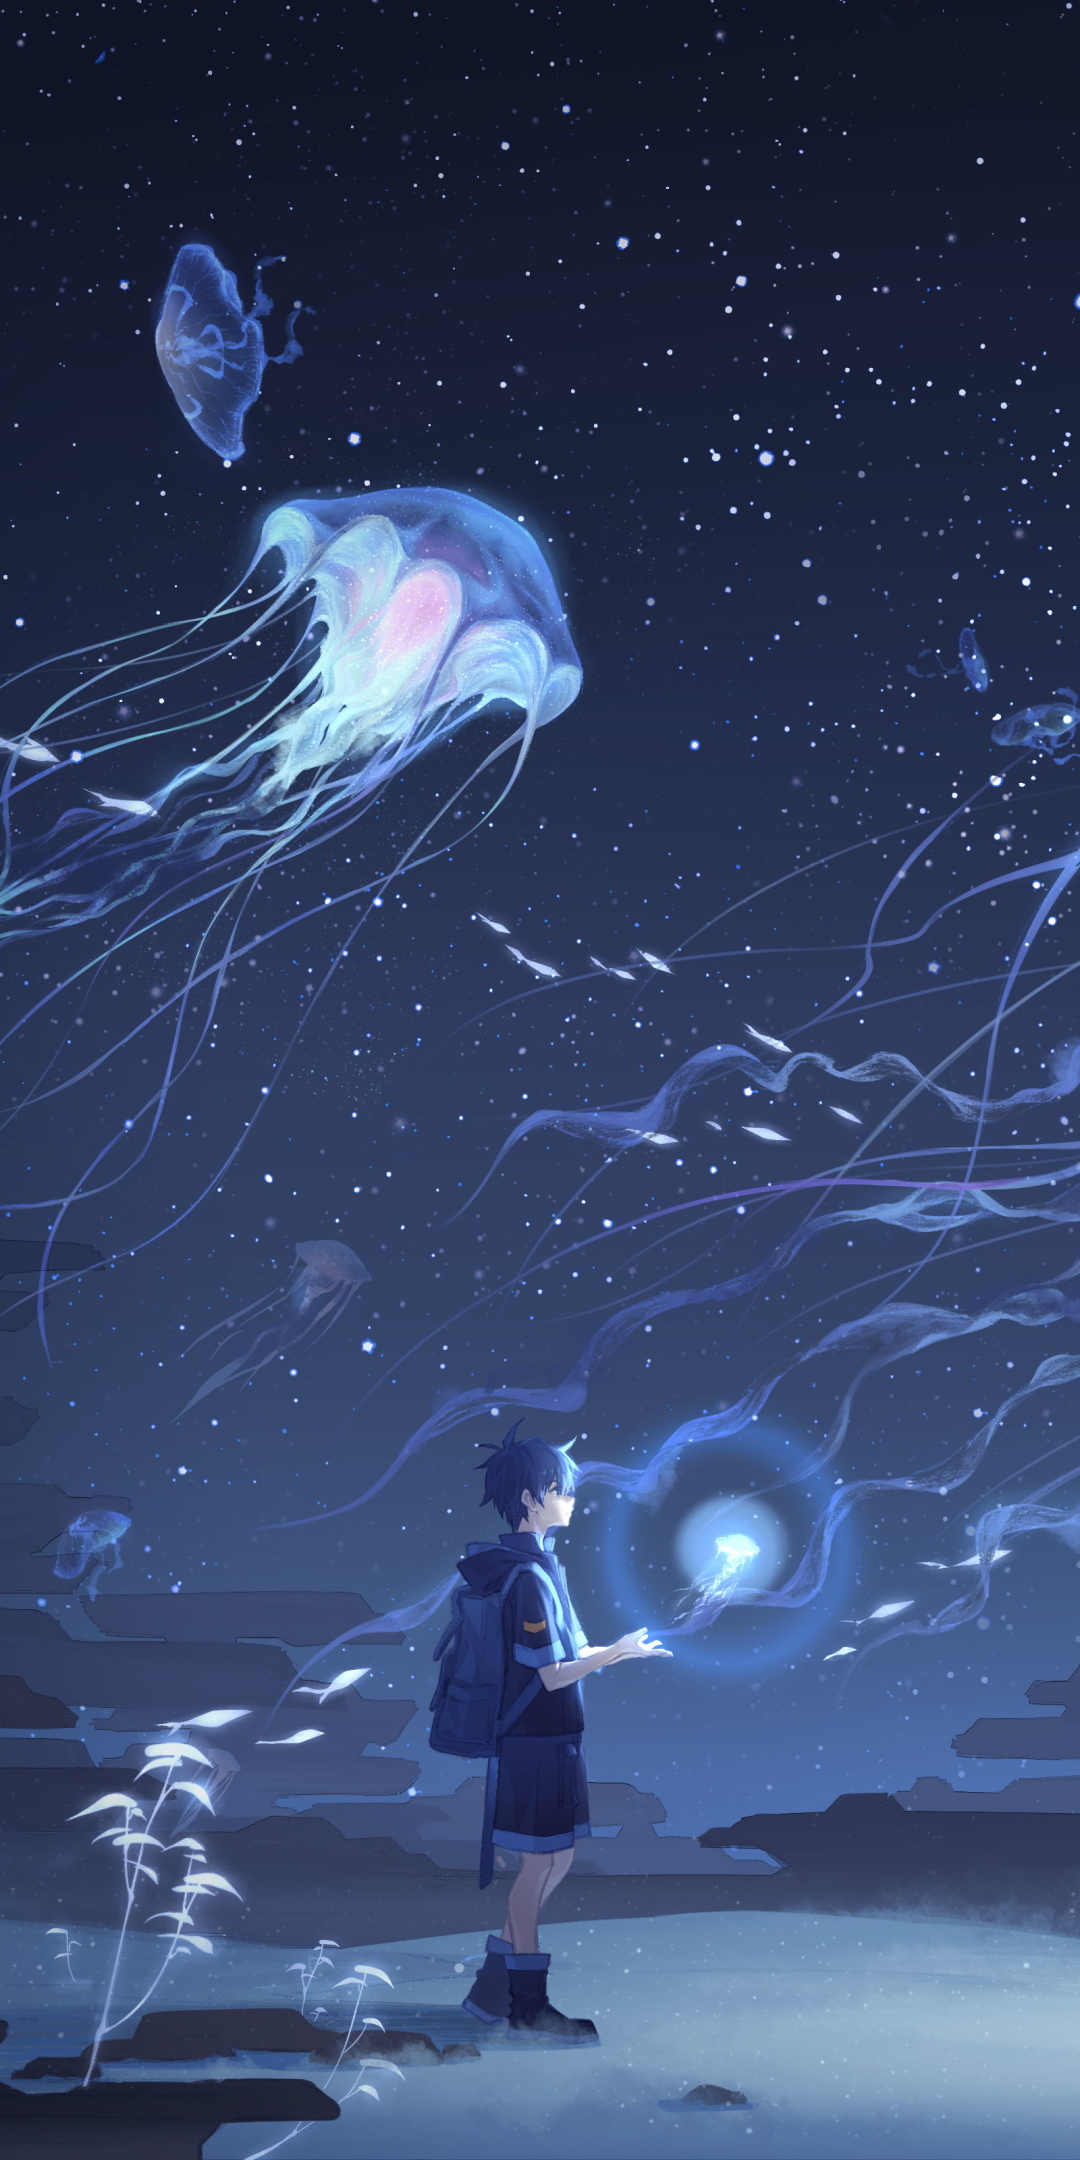 Boy in a land of jellyfish by Arsh